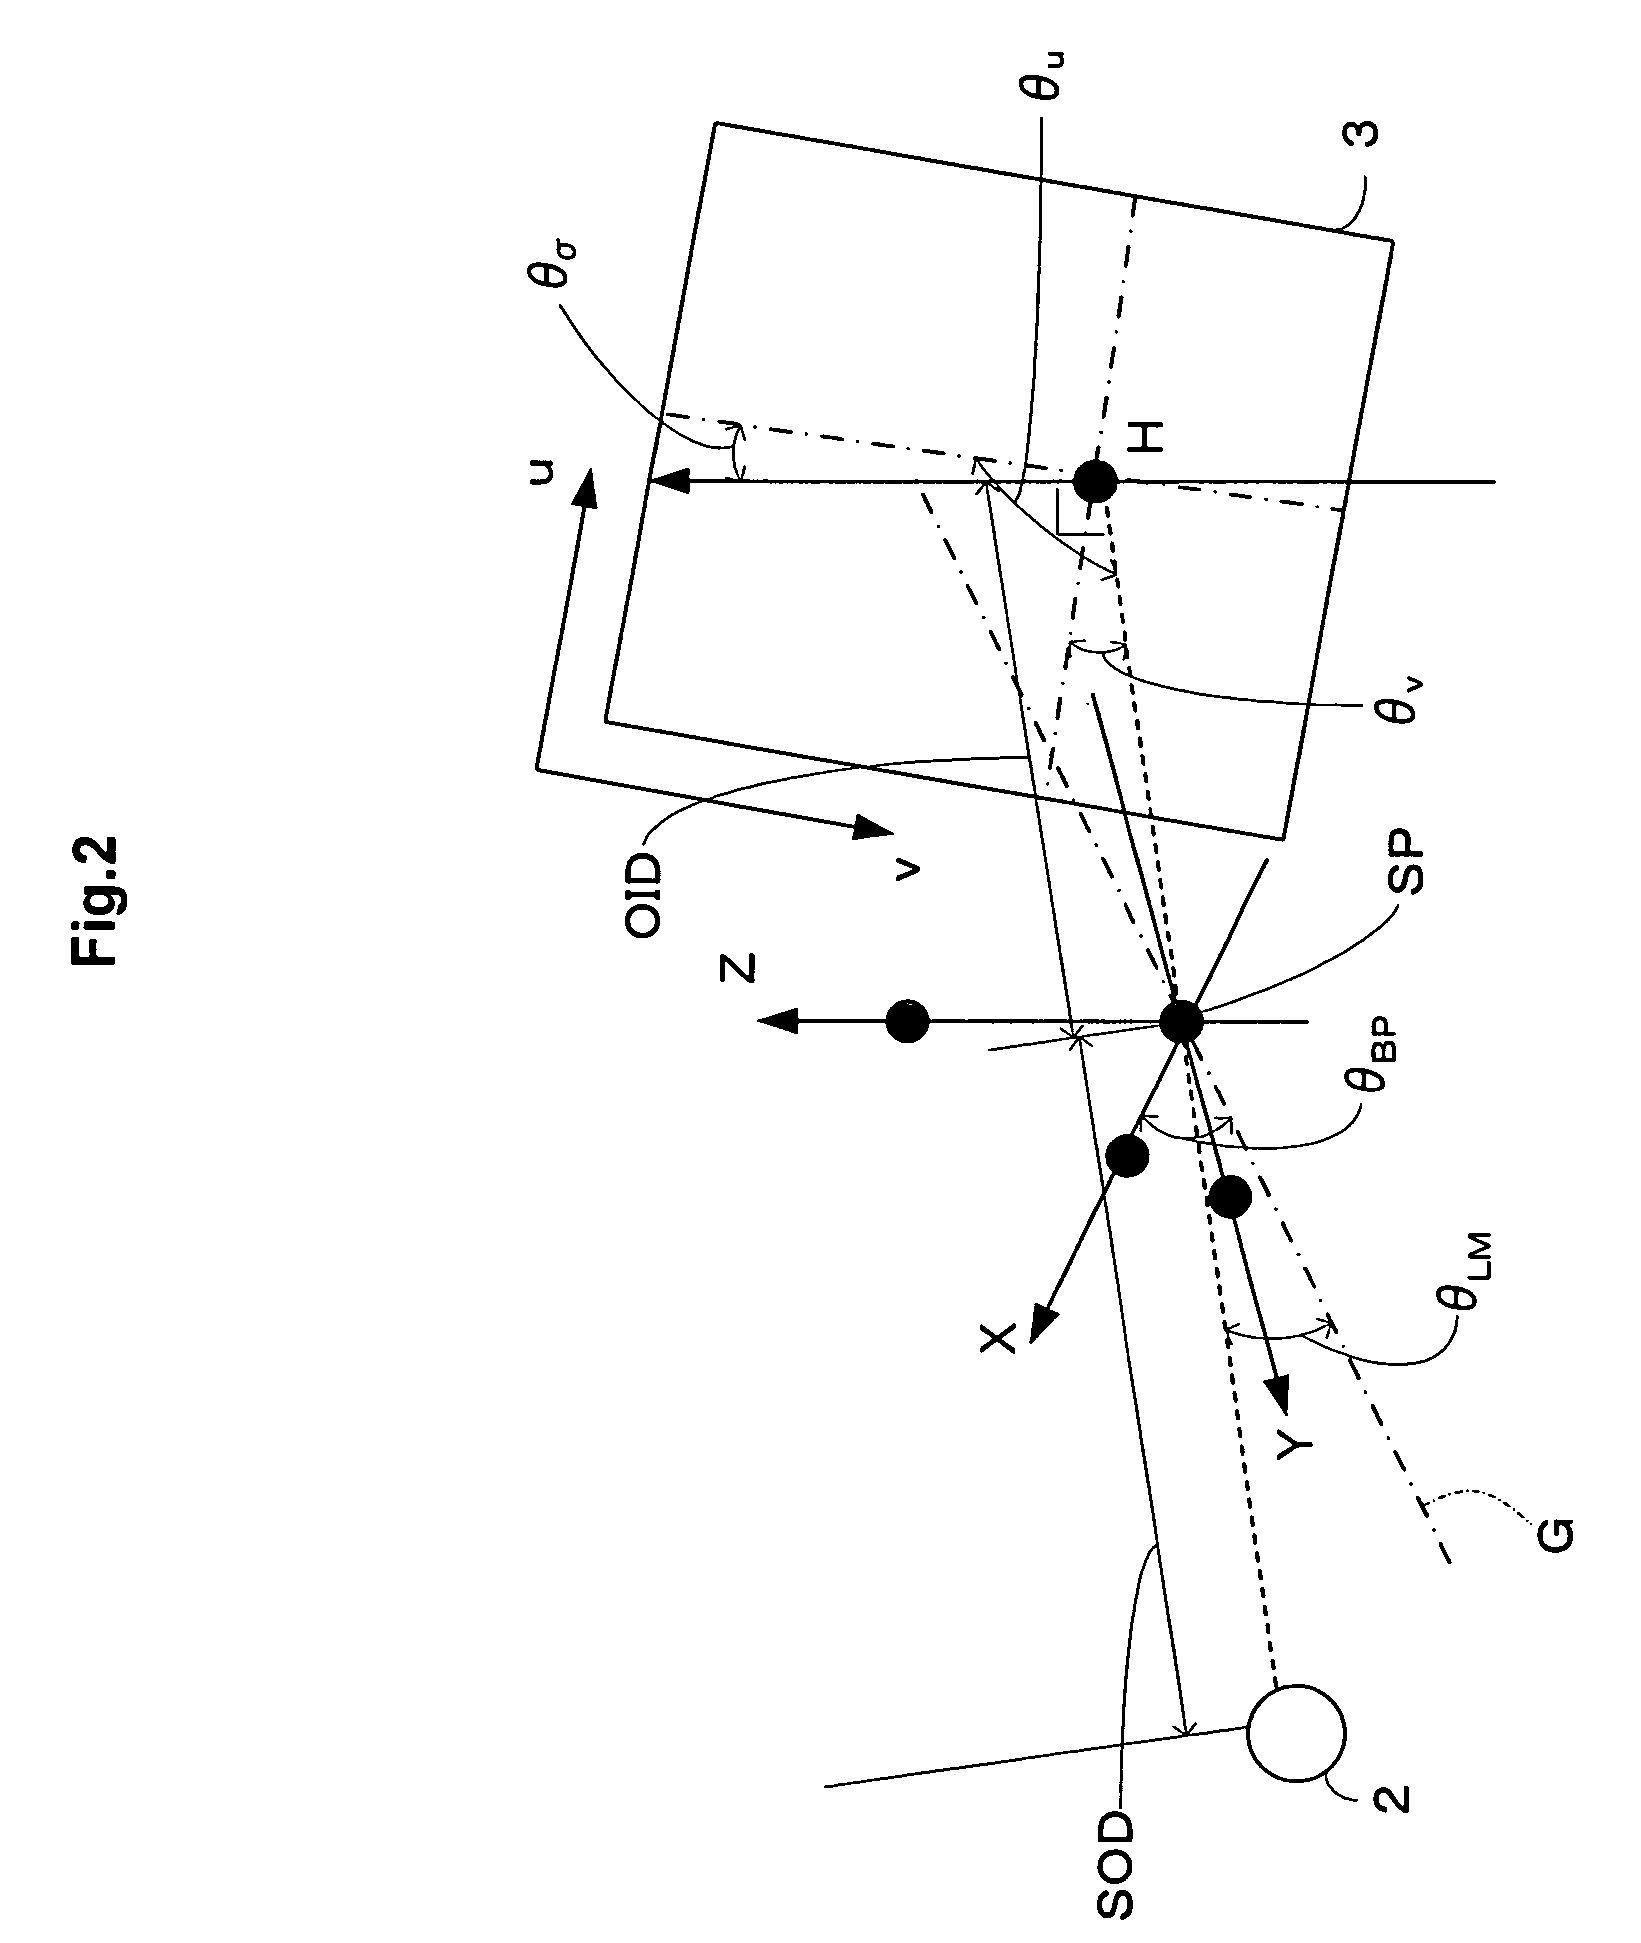 Slice image and/or dimensional image creating method